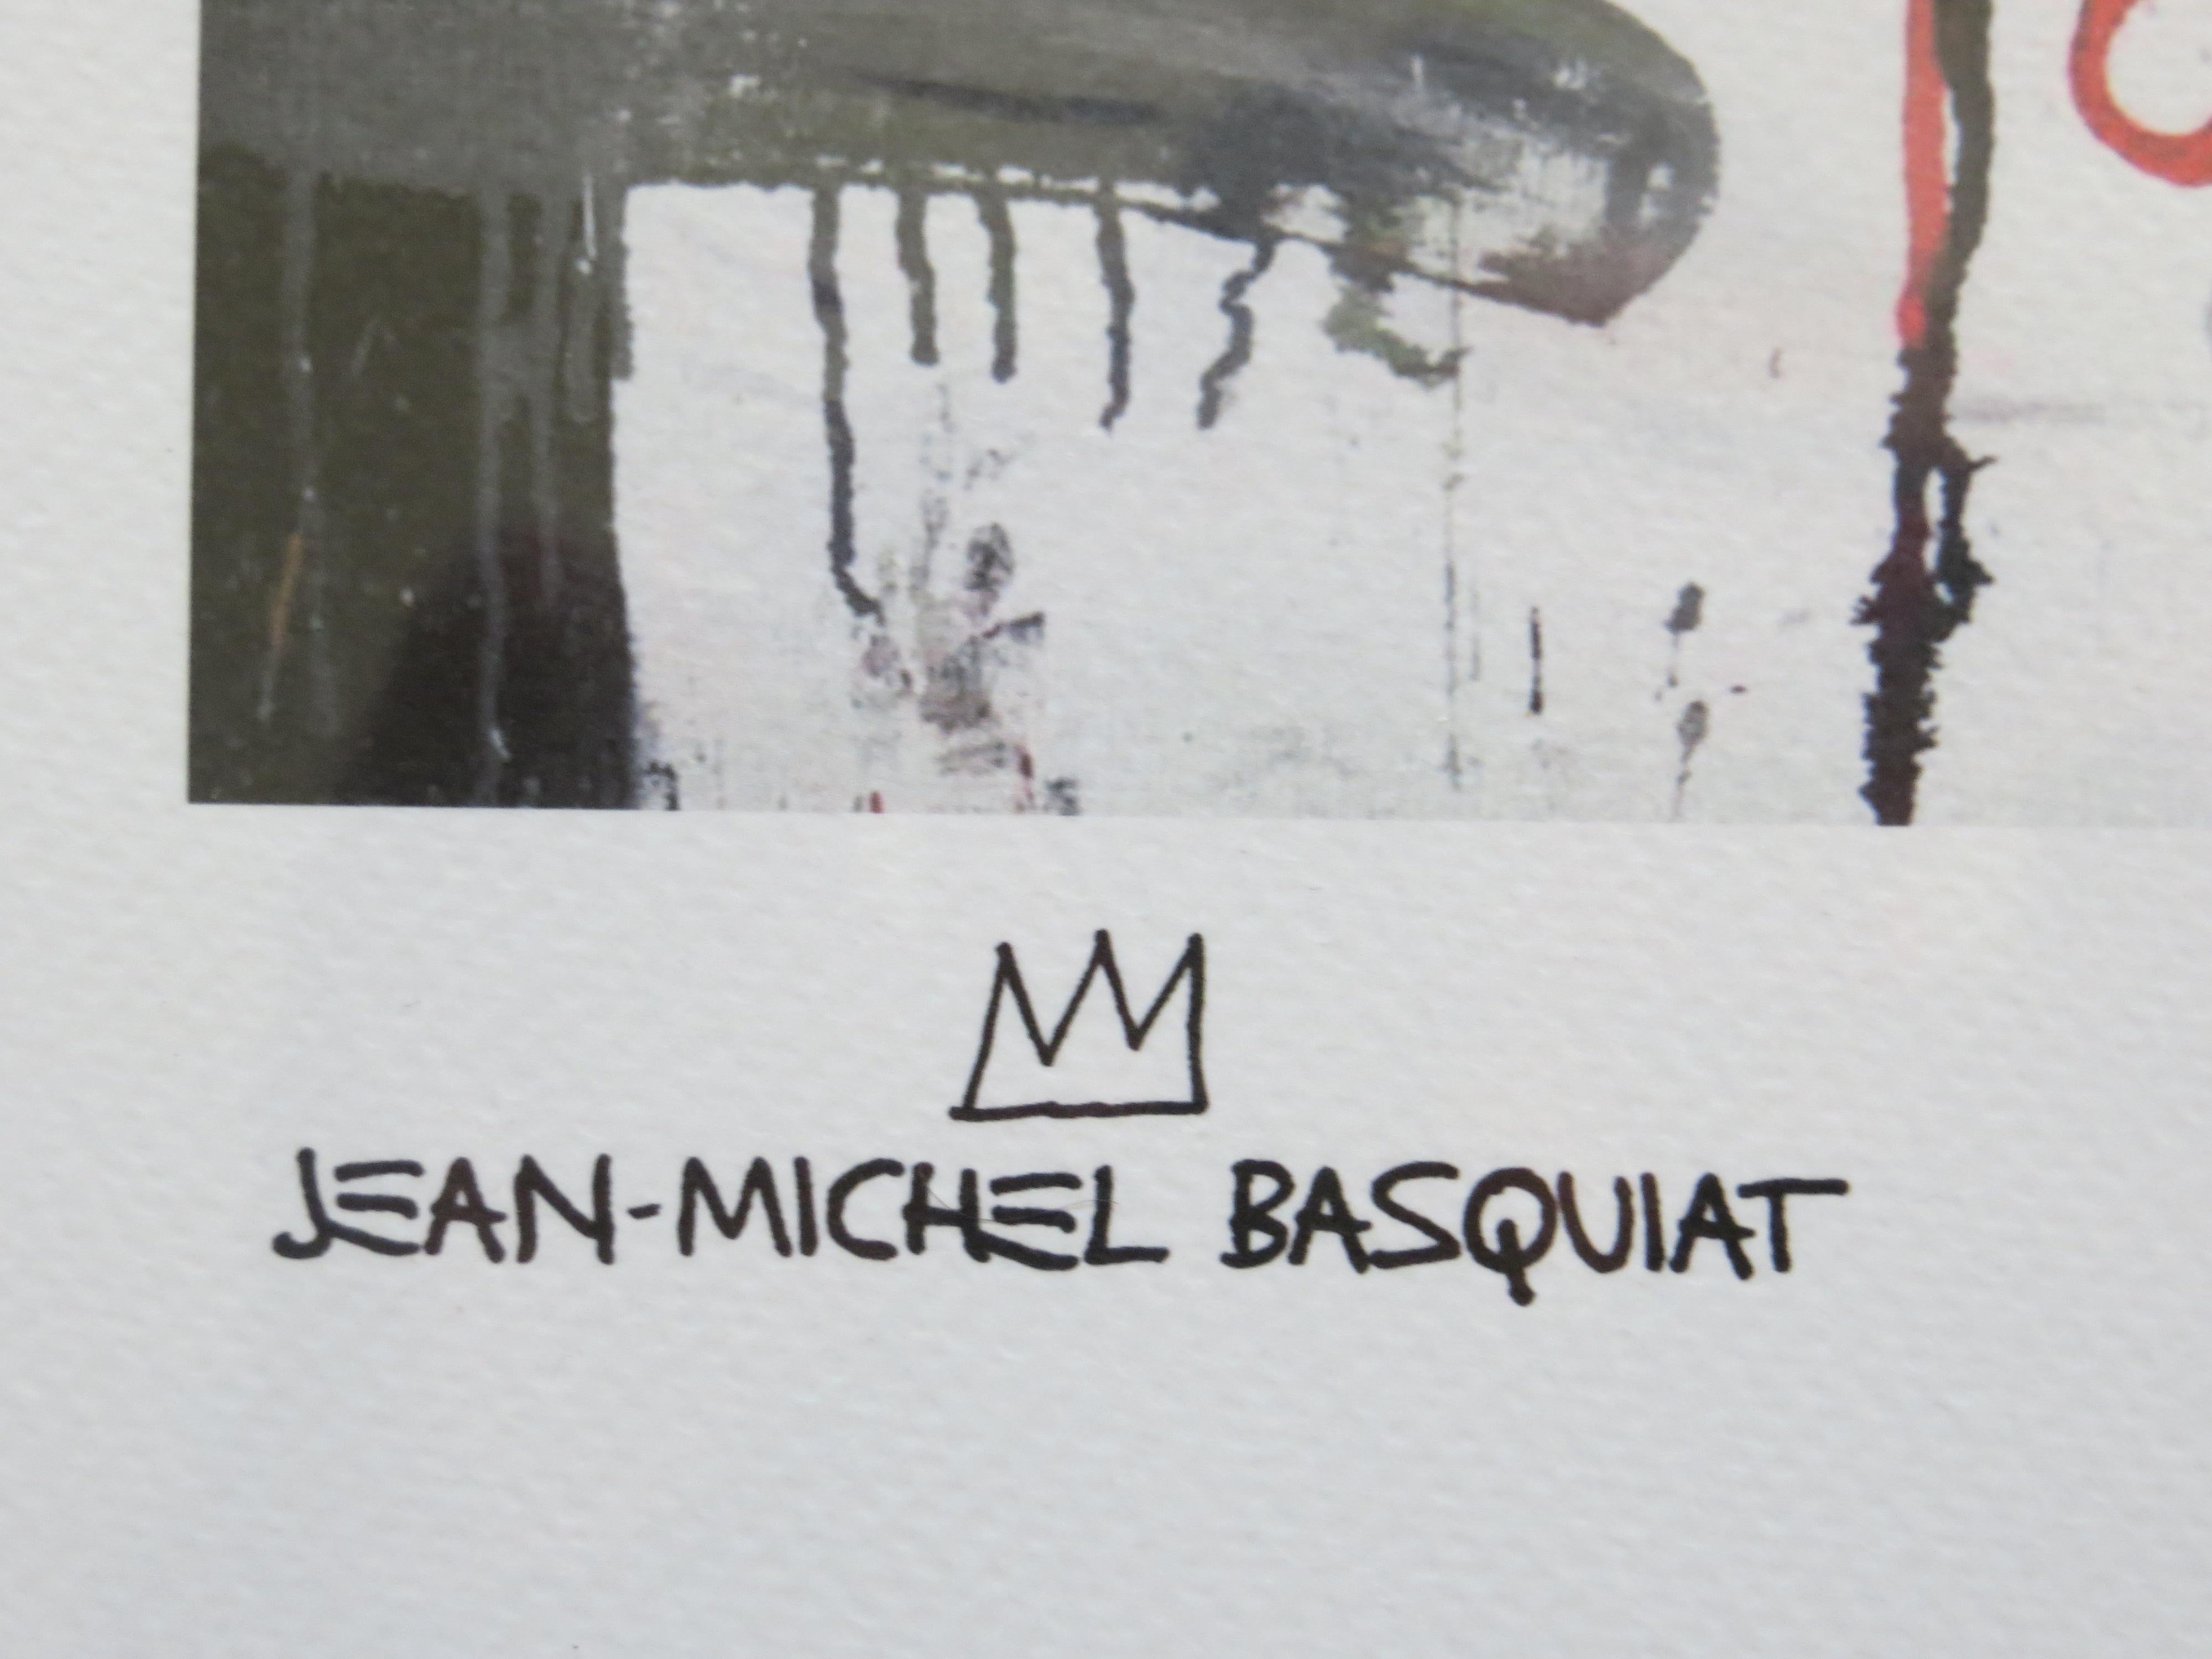 The Estate of Jean-Michel Basquiat,  Lithograph   57  /300 - Print by (after) Jean-Michel Basquiat